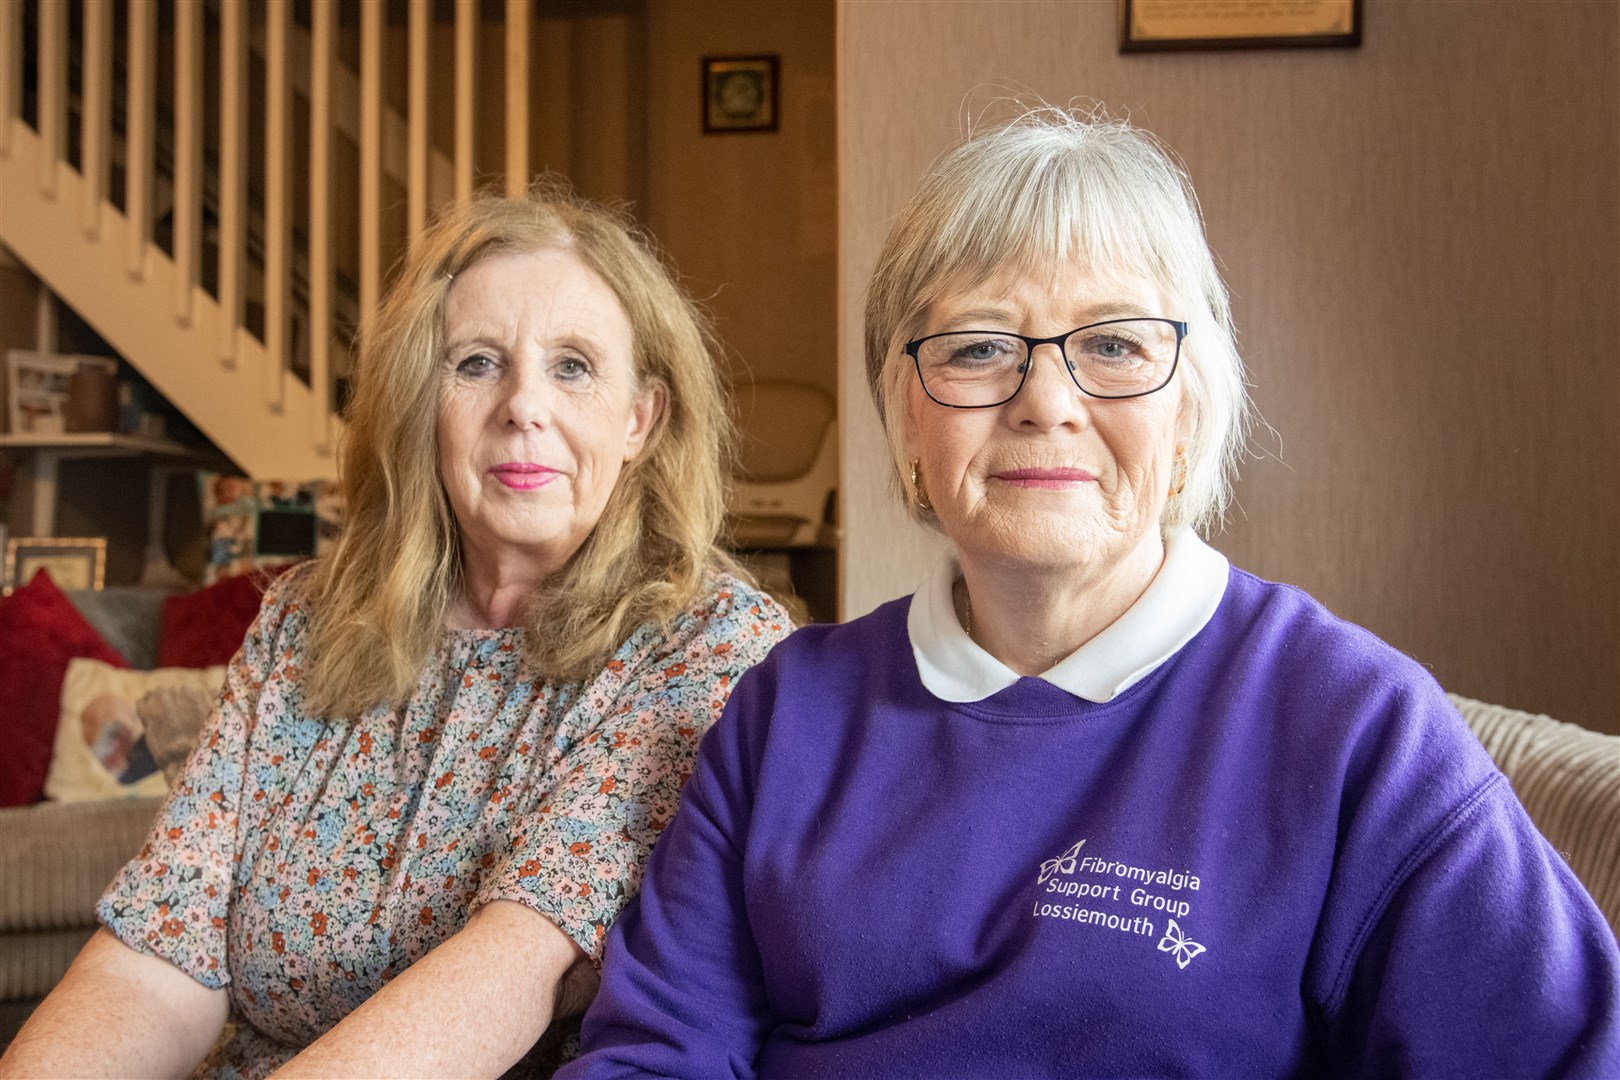 Fiona Campbell (left) and Karen McSheffrey from the Lossiemouth Fibromyalgia Support Group. Picture: Daniel Forsyth.